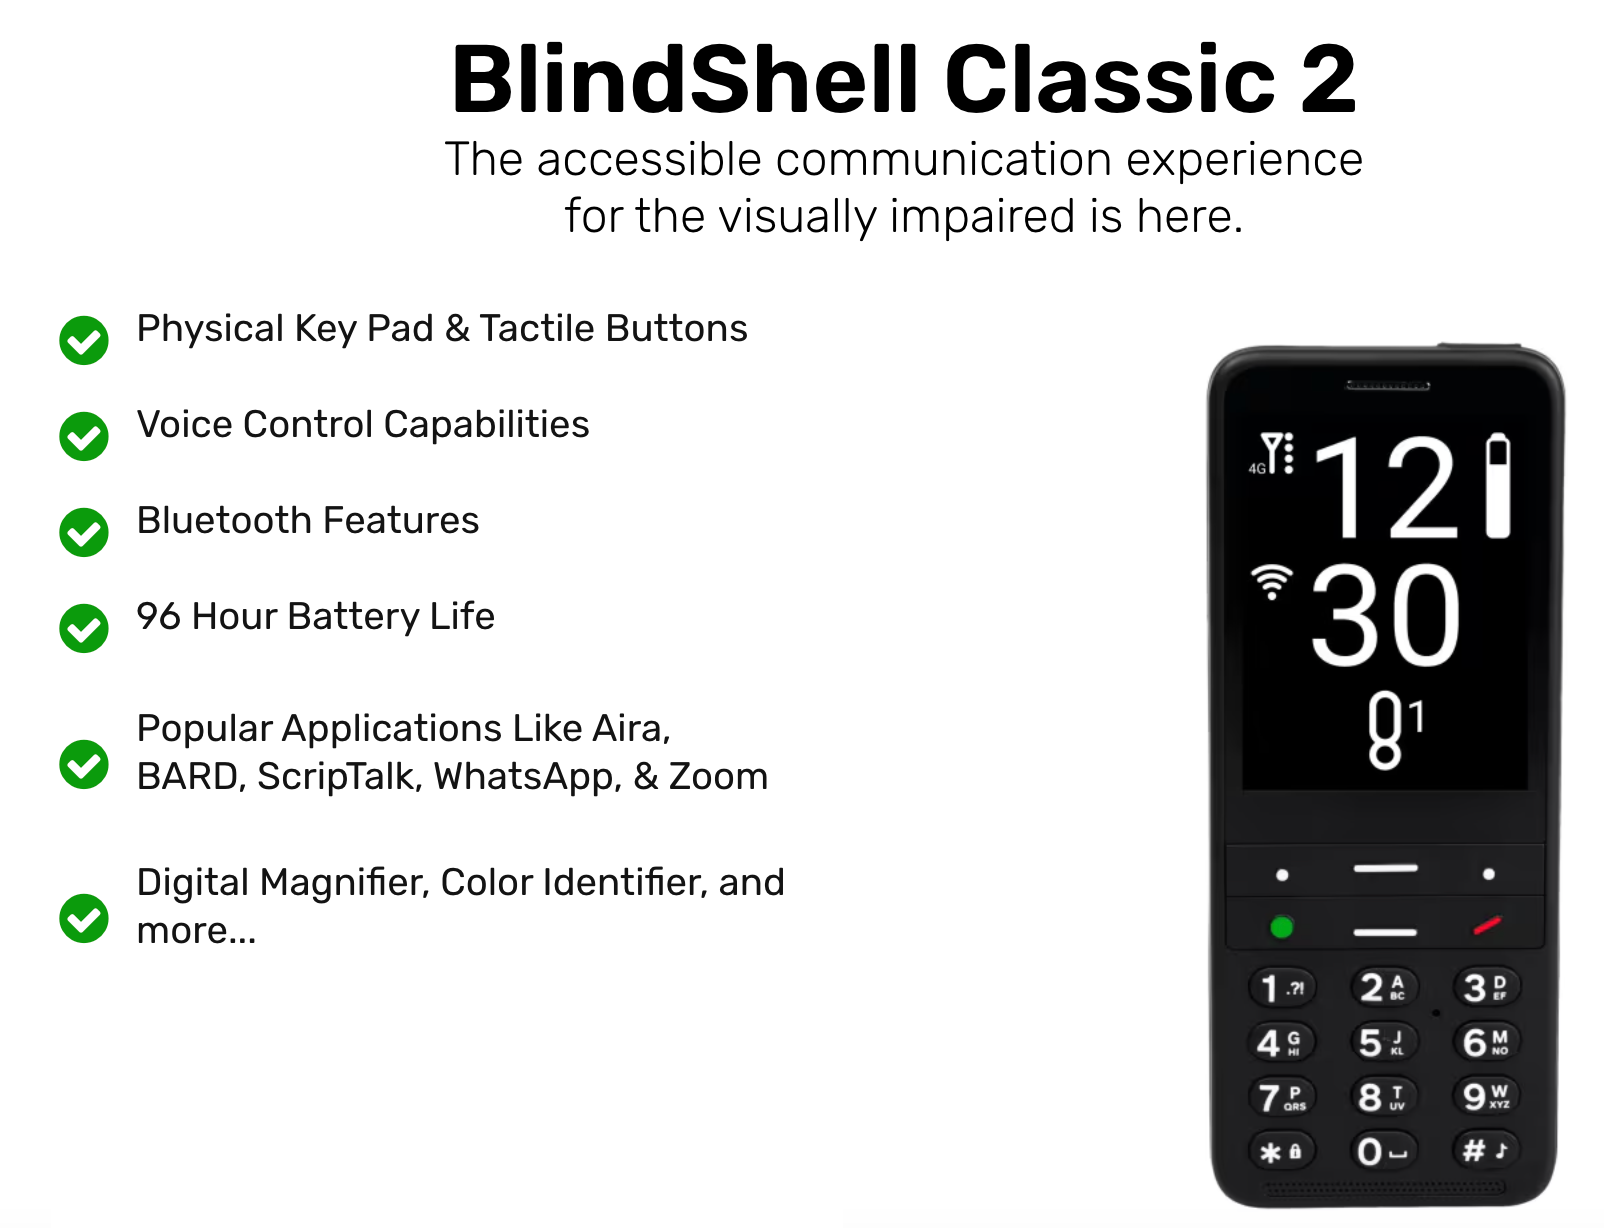 Official info at https://blindshellusa.com/blindshell-classic-2-collection